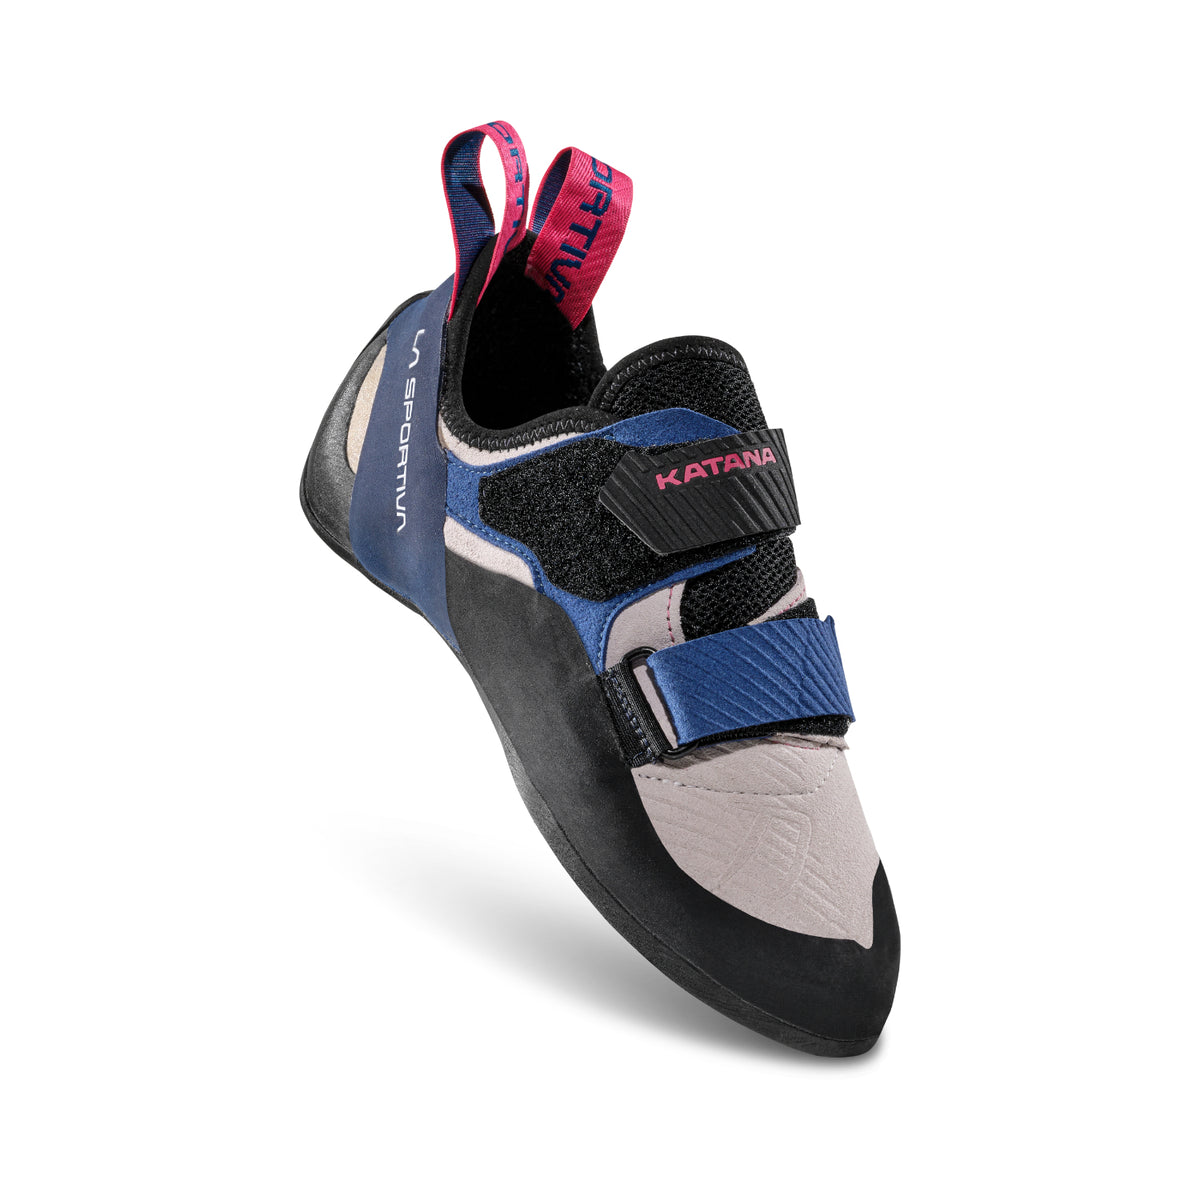 La Sportiva Katana Womens climbing shoes in navy pink and white